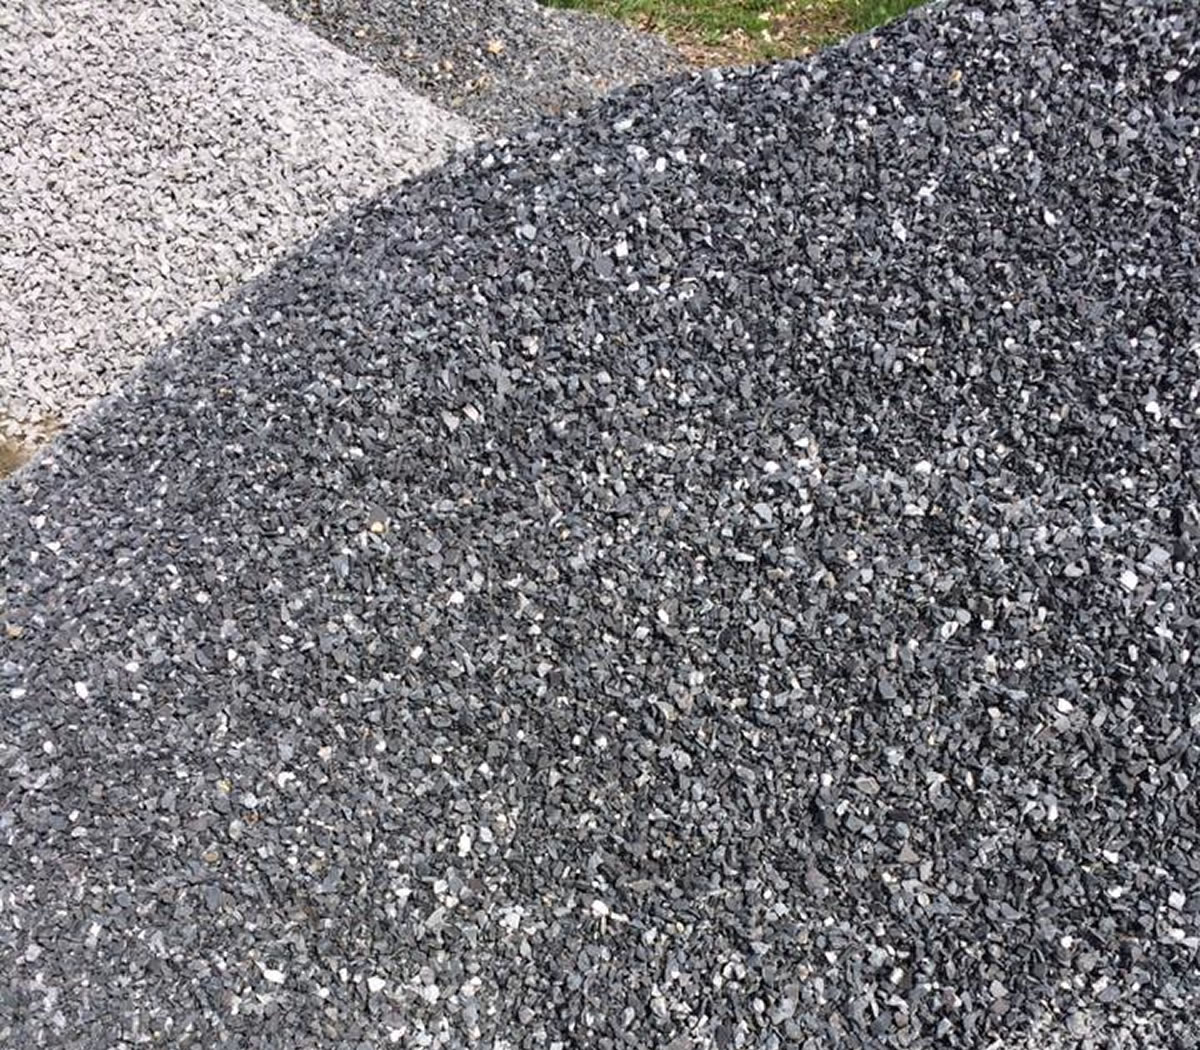 https://centralmainemulch.com/wp-content/uploads/2020/04/central-maine-crushed-stone-company-delivery-sq.jpg